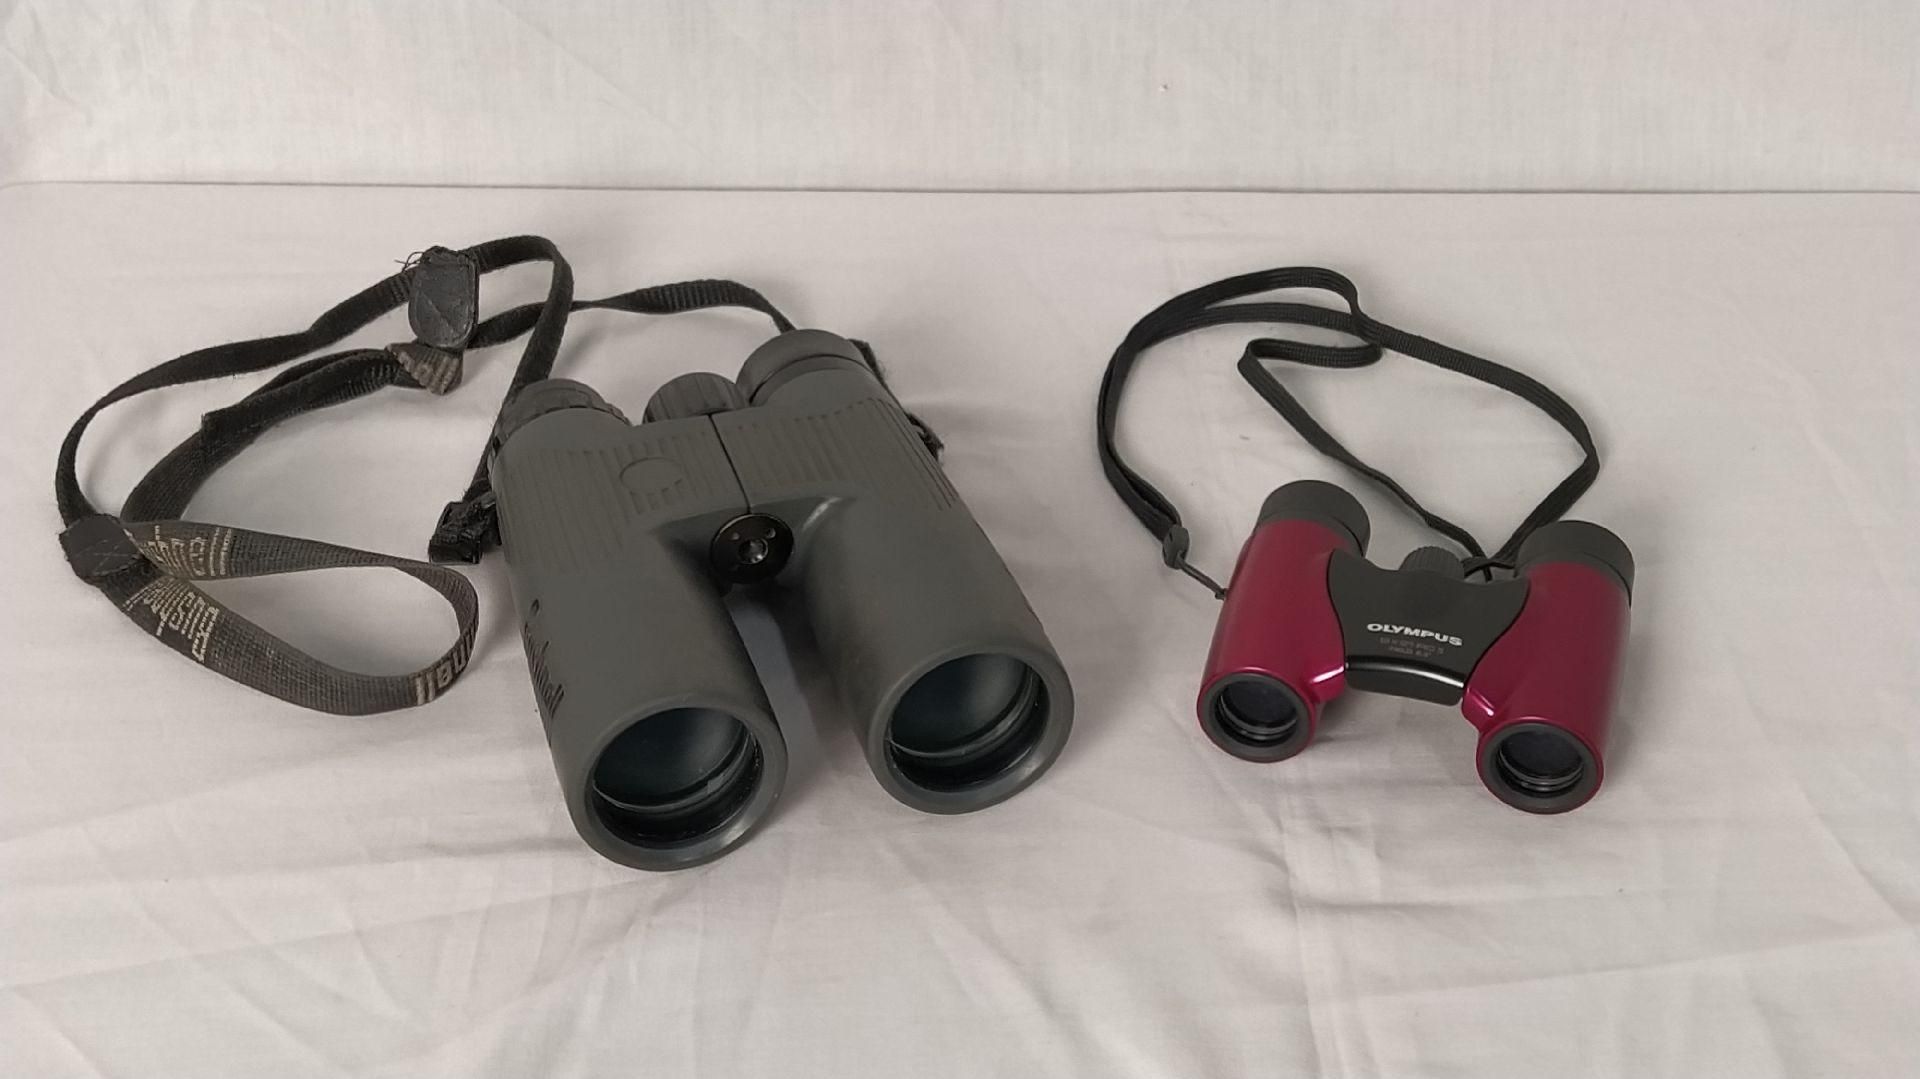 Null Set of 2 binoculars including:
-BUSHNELL Nature View 8x42 FOV 330FT
-OLYMPU&hellip;